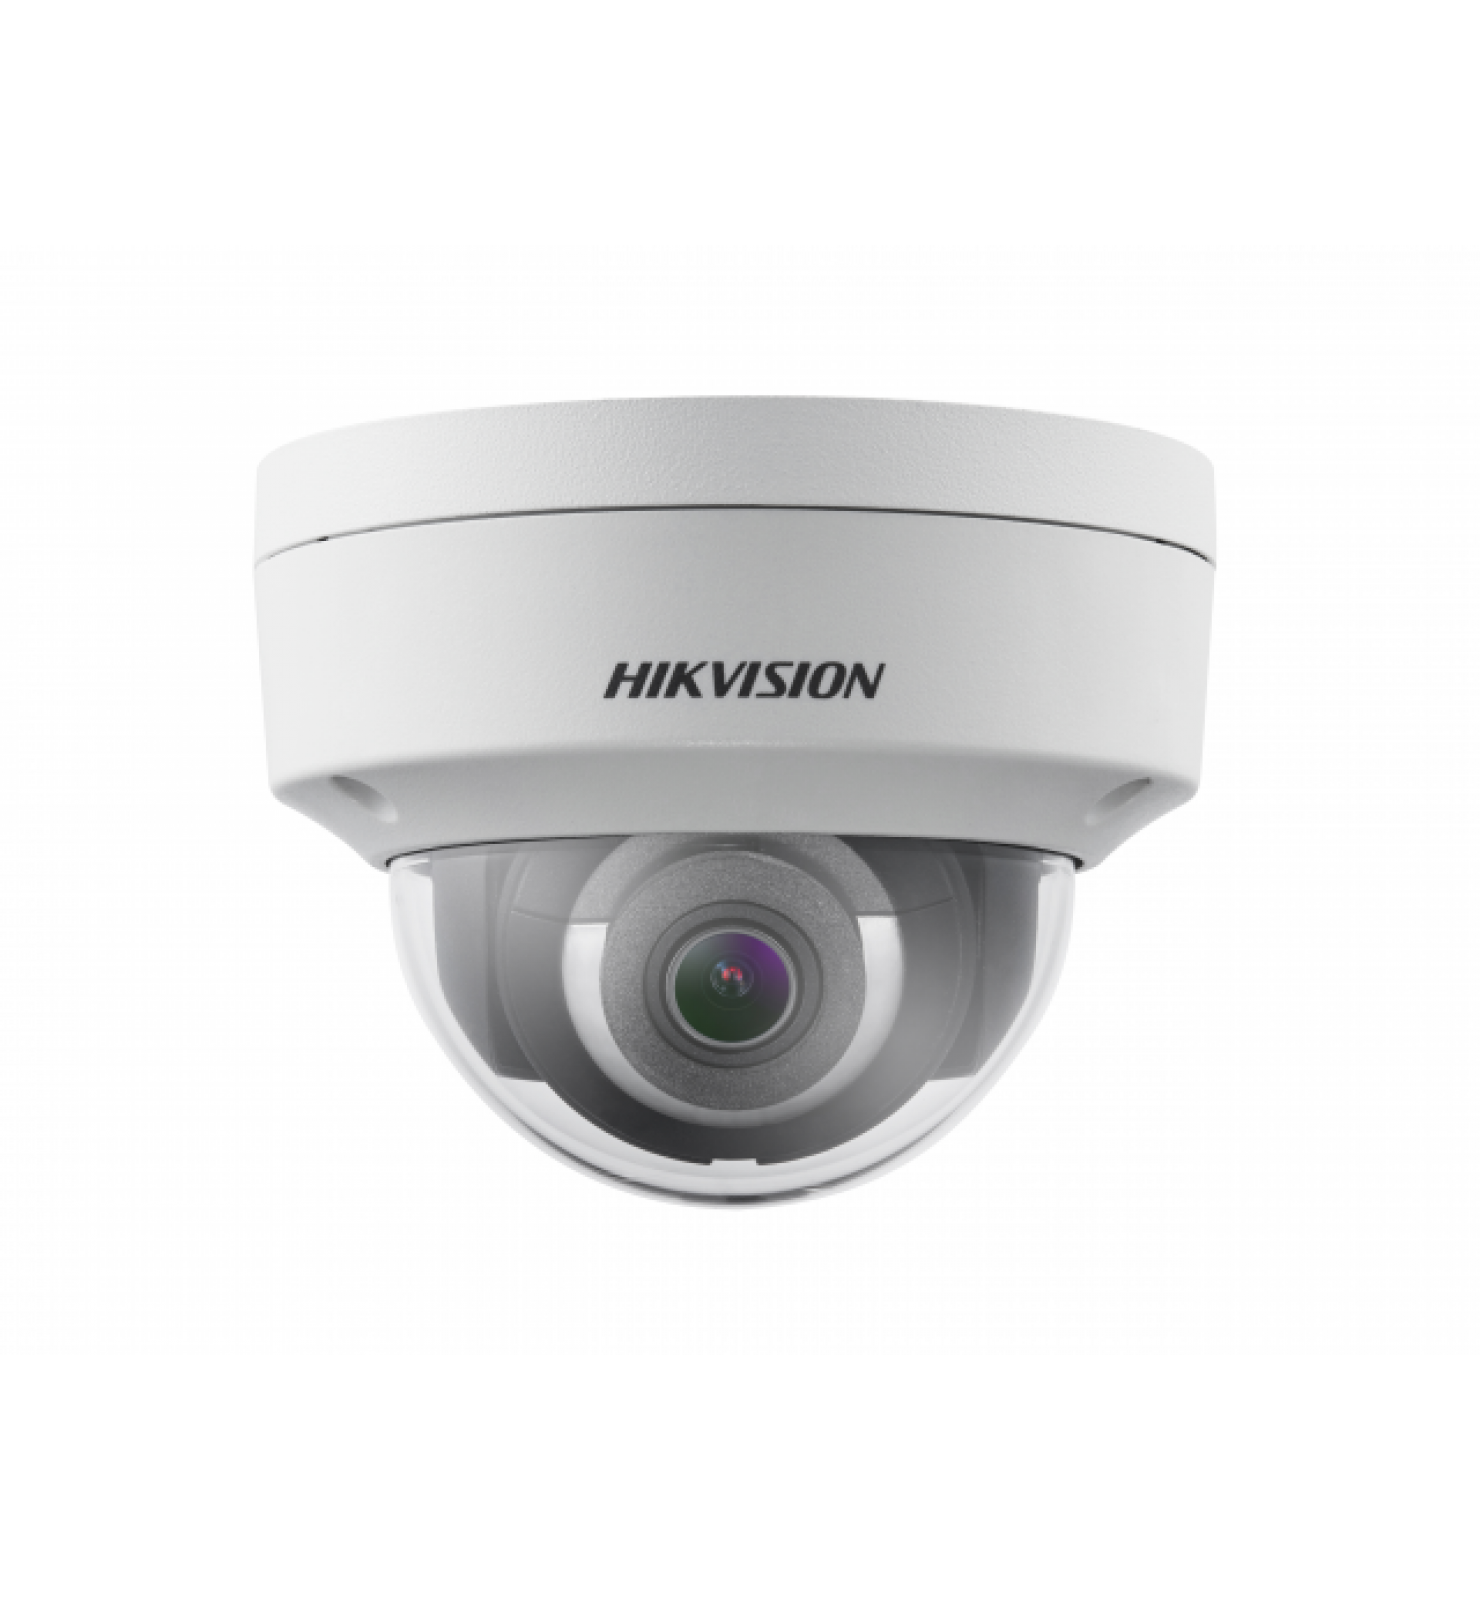 Камера Hikvision DS-2CD2123G0-IS